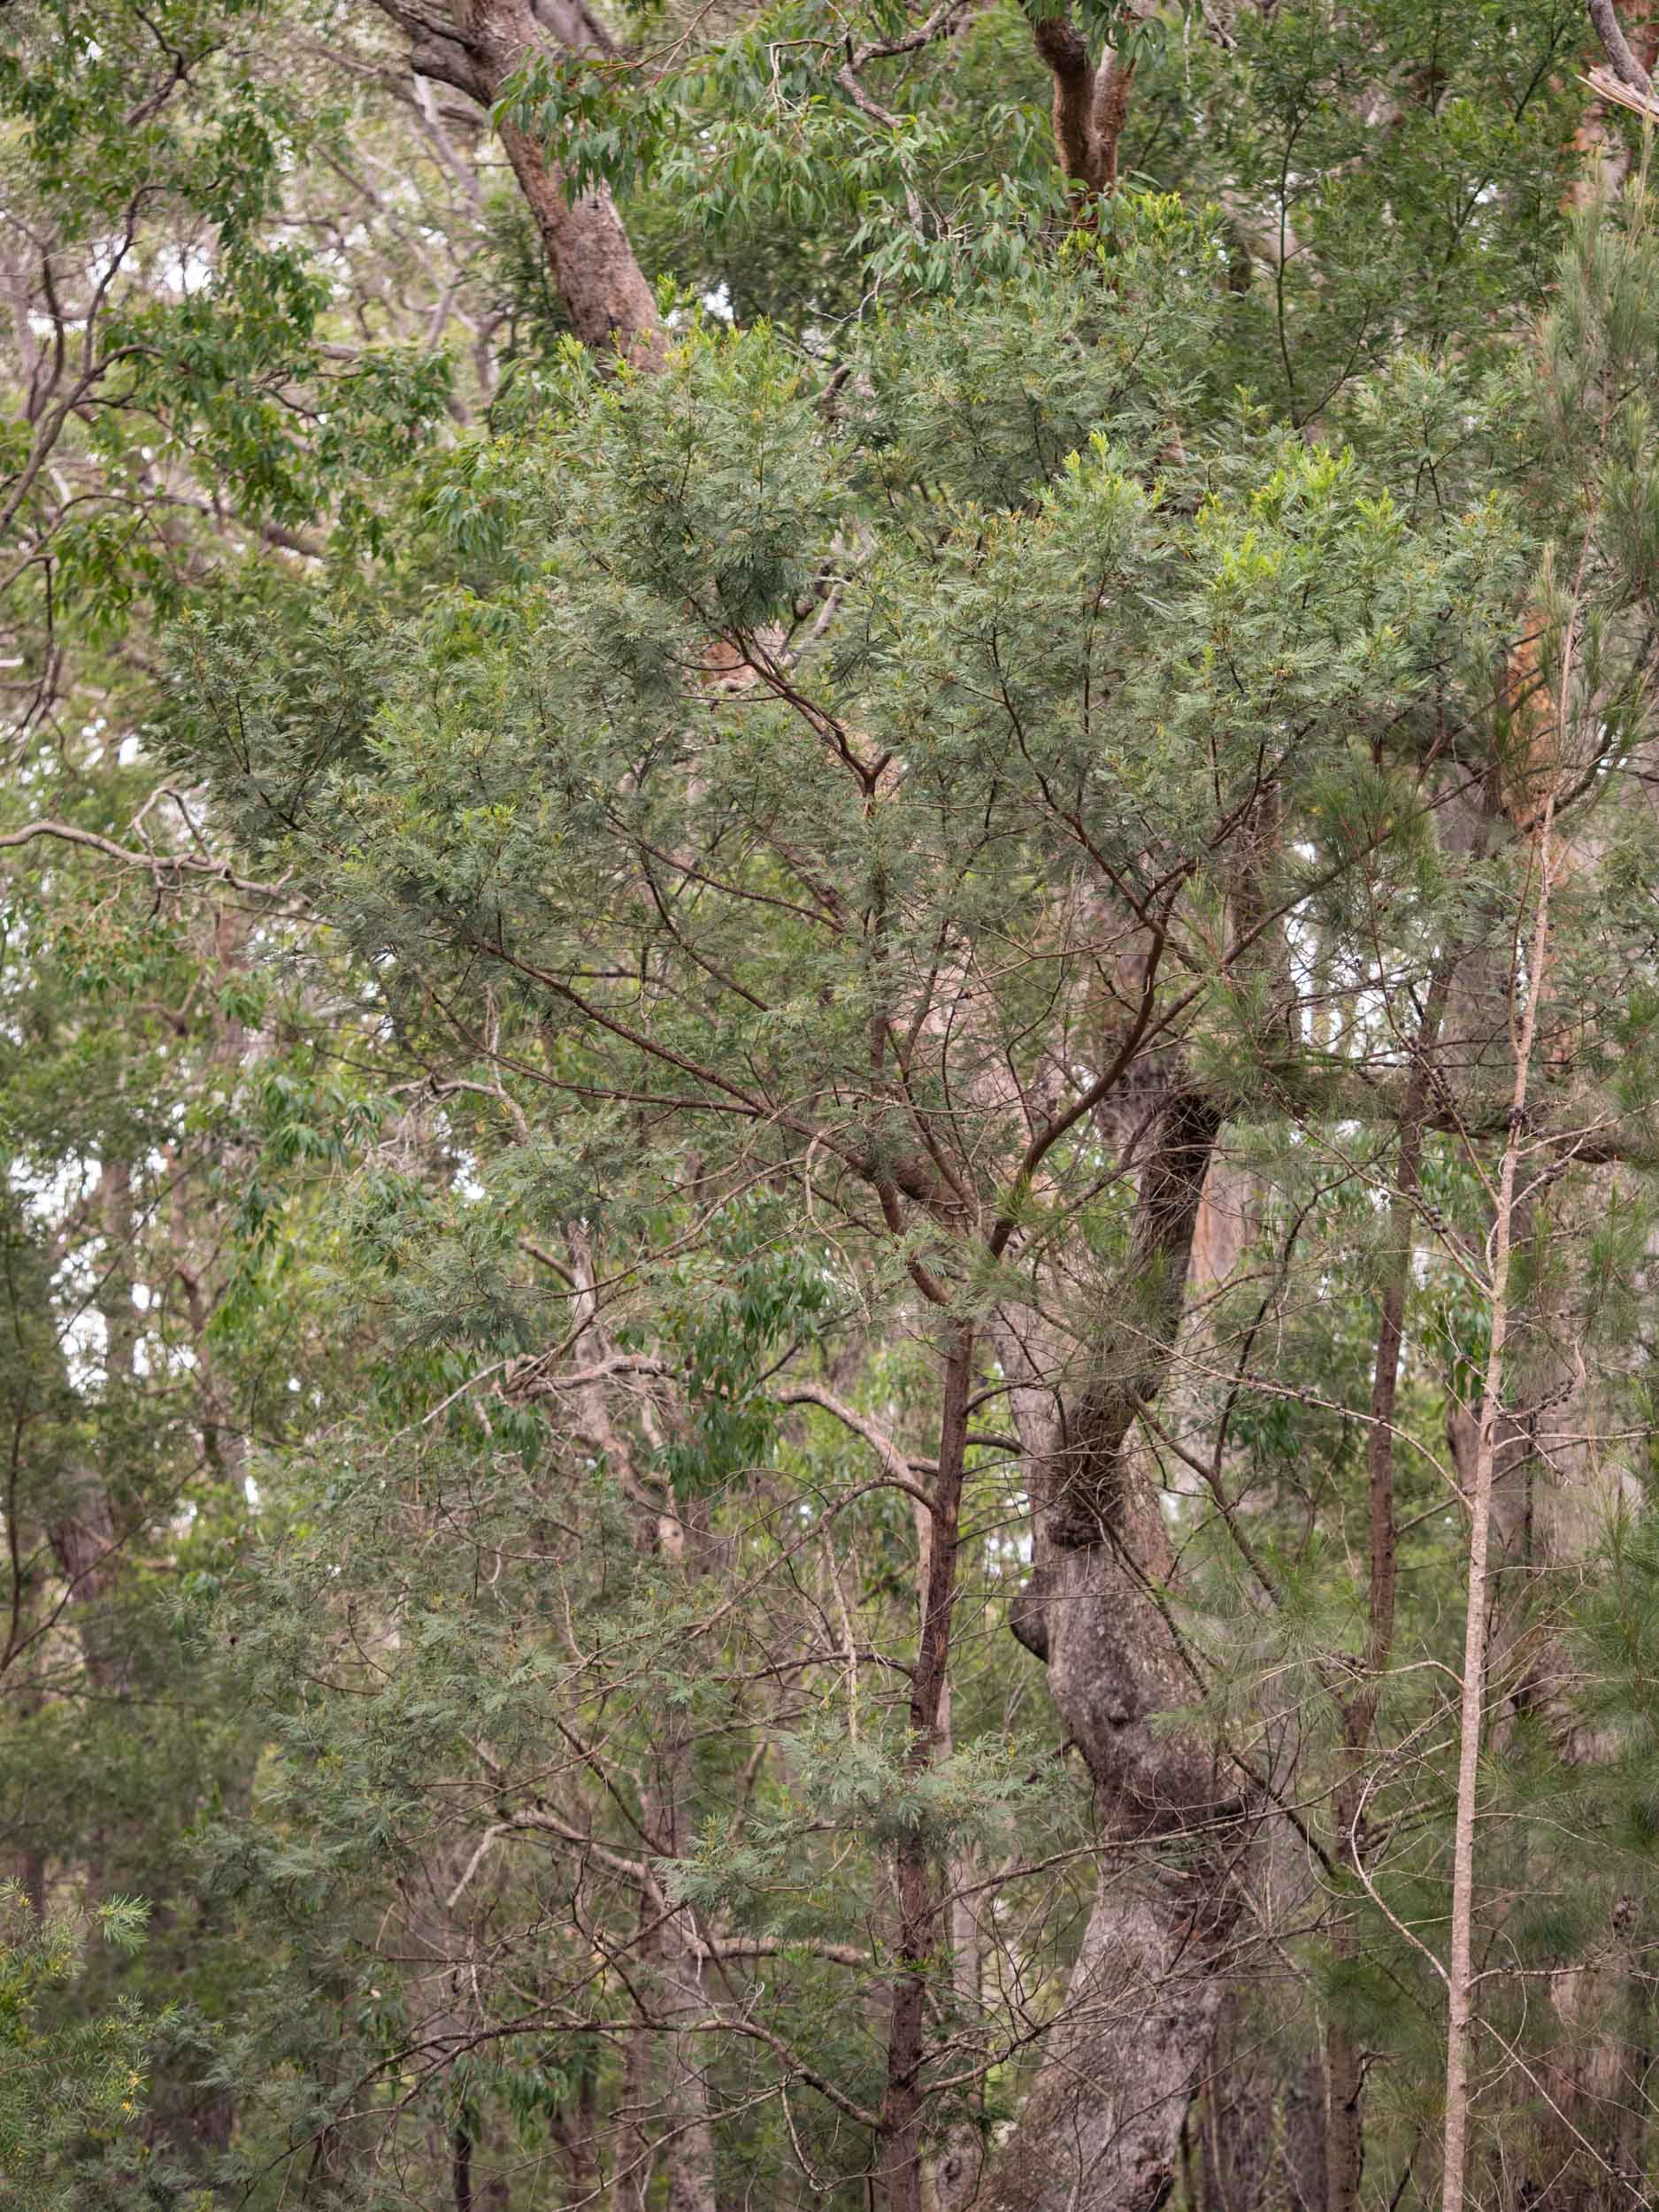  An  Acacia mearnsii  tree about 10m high 